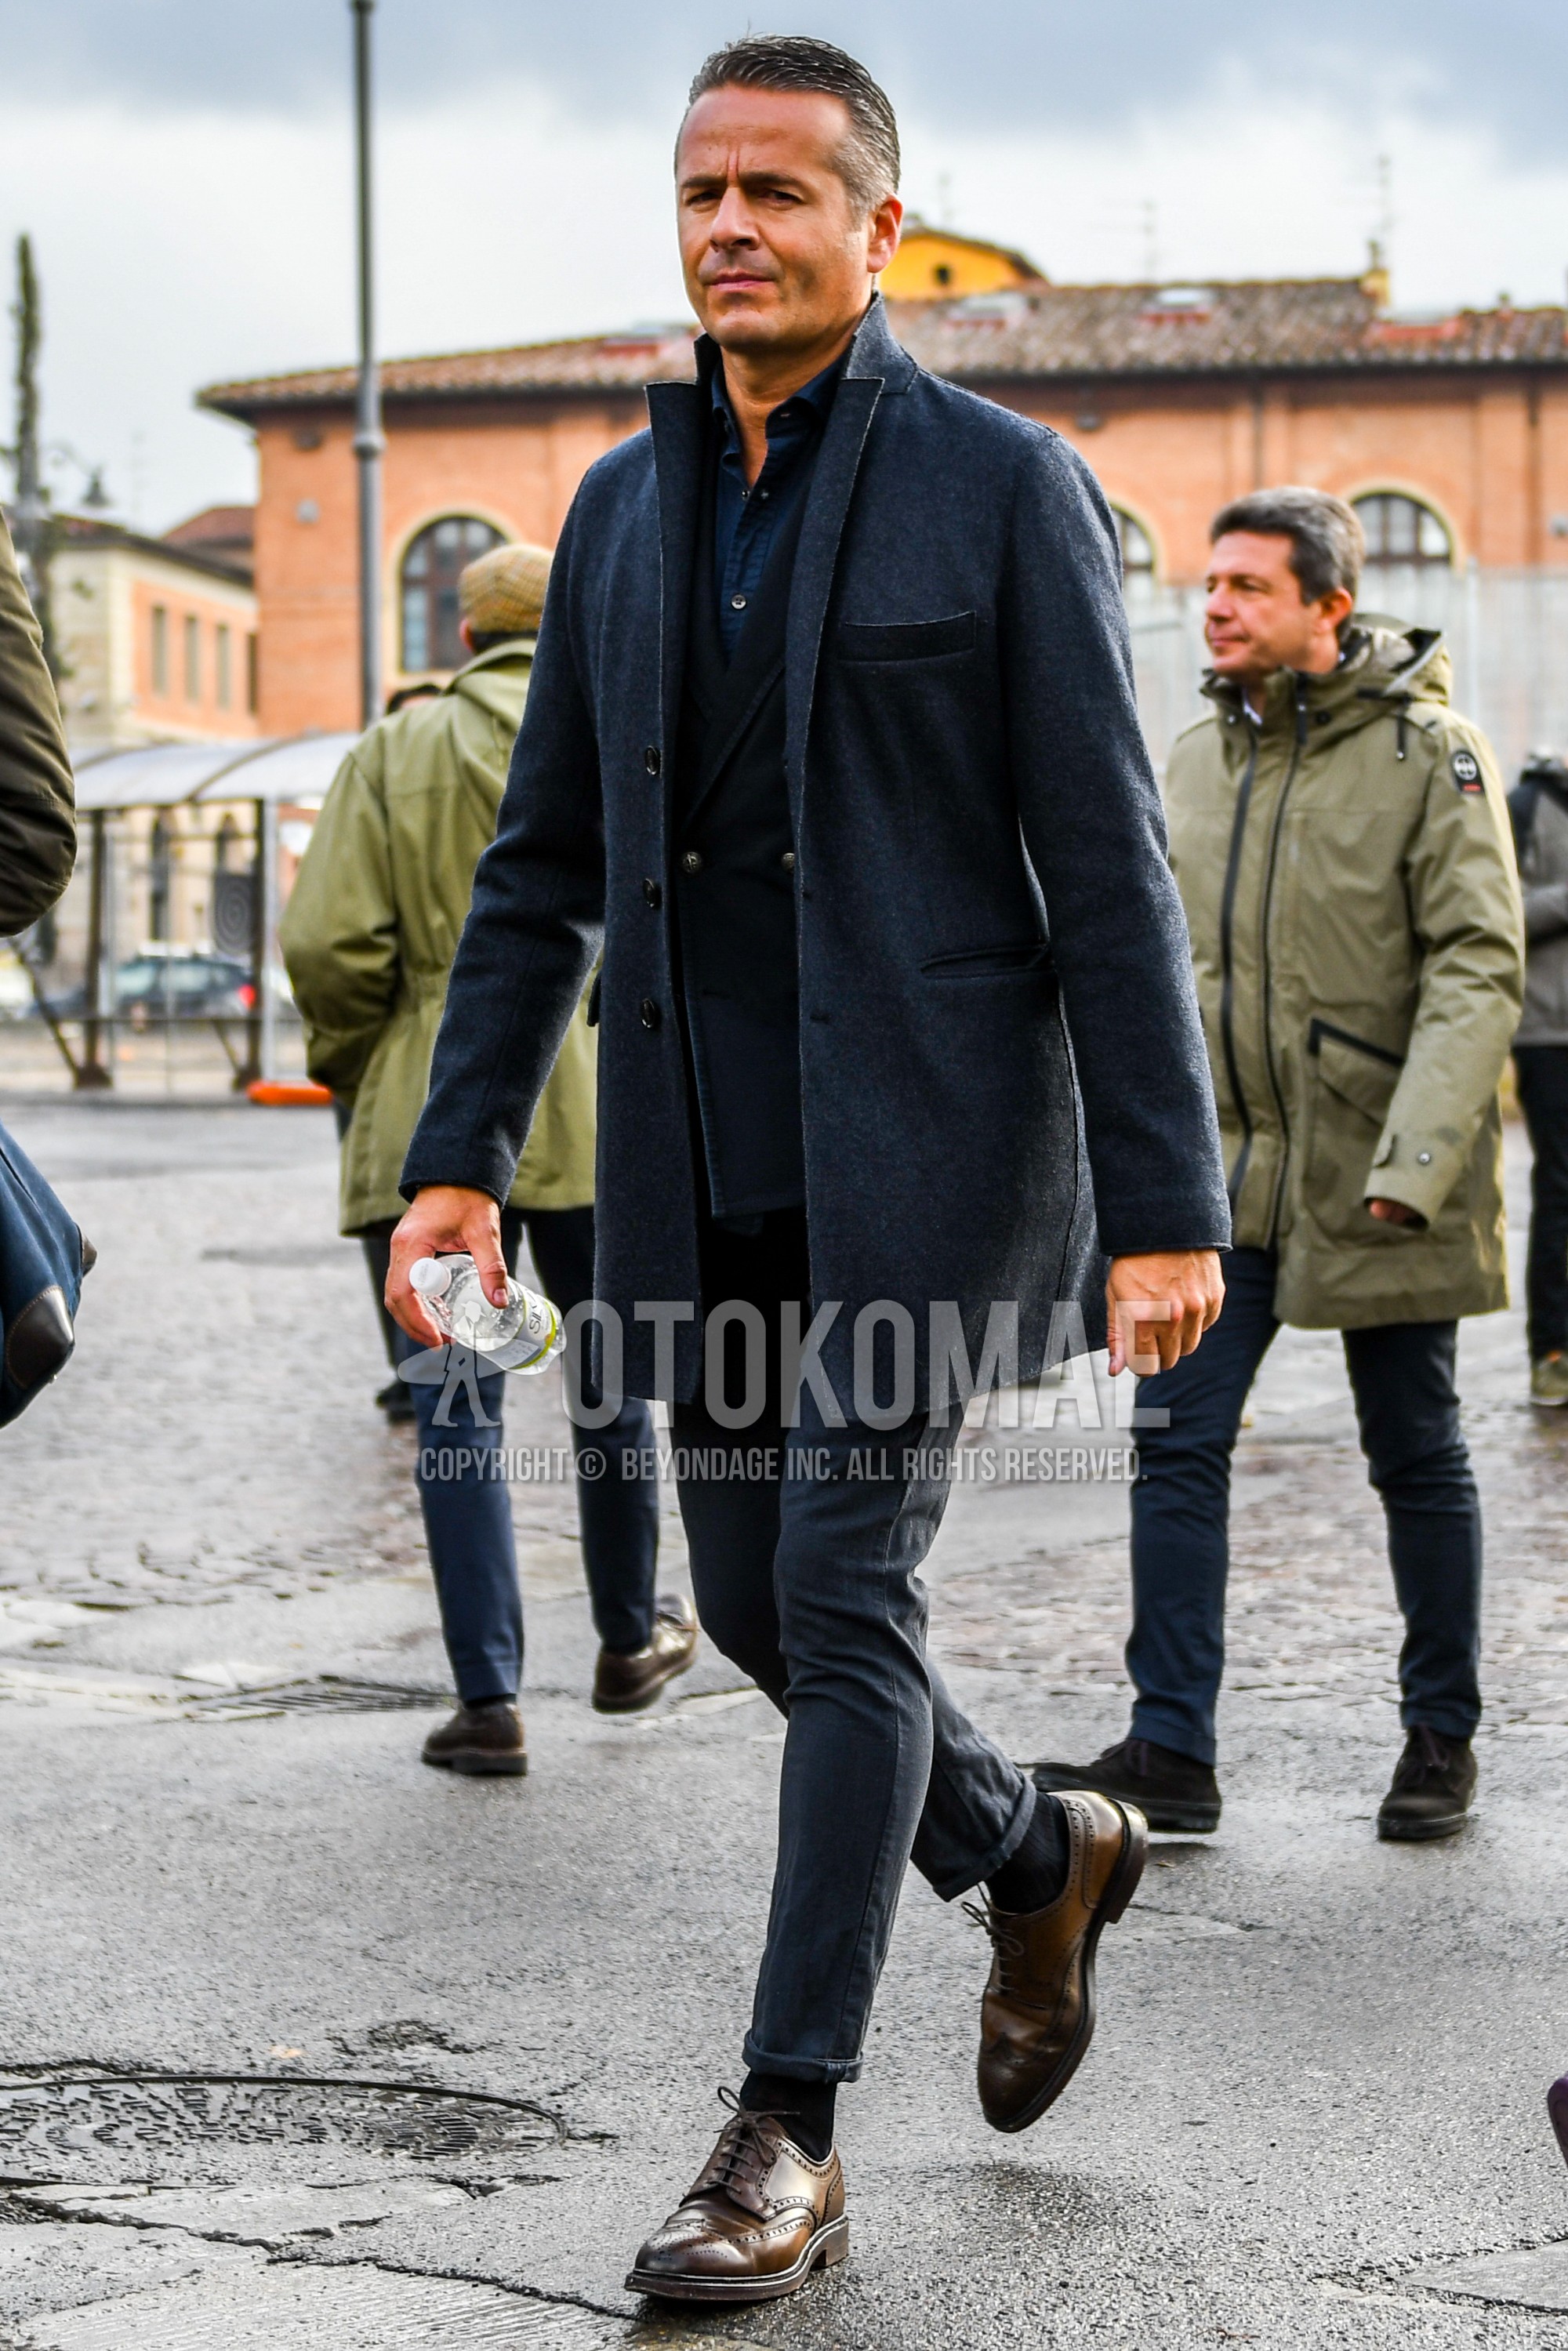 Men's winter outfit with dark gray plain chester coat, black plain tailored jacket, navy plain shirt, dark gray plain cotton pants, black plain socks, brown brogue shoes leather shoes.